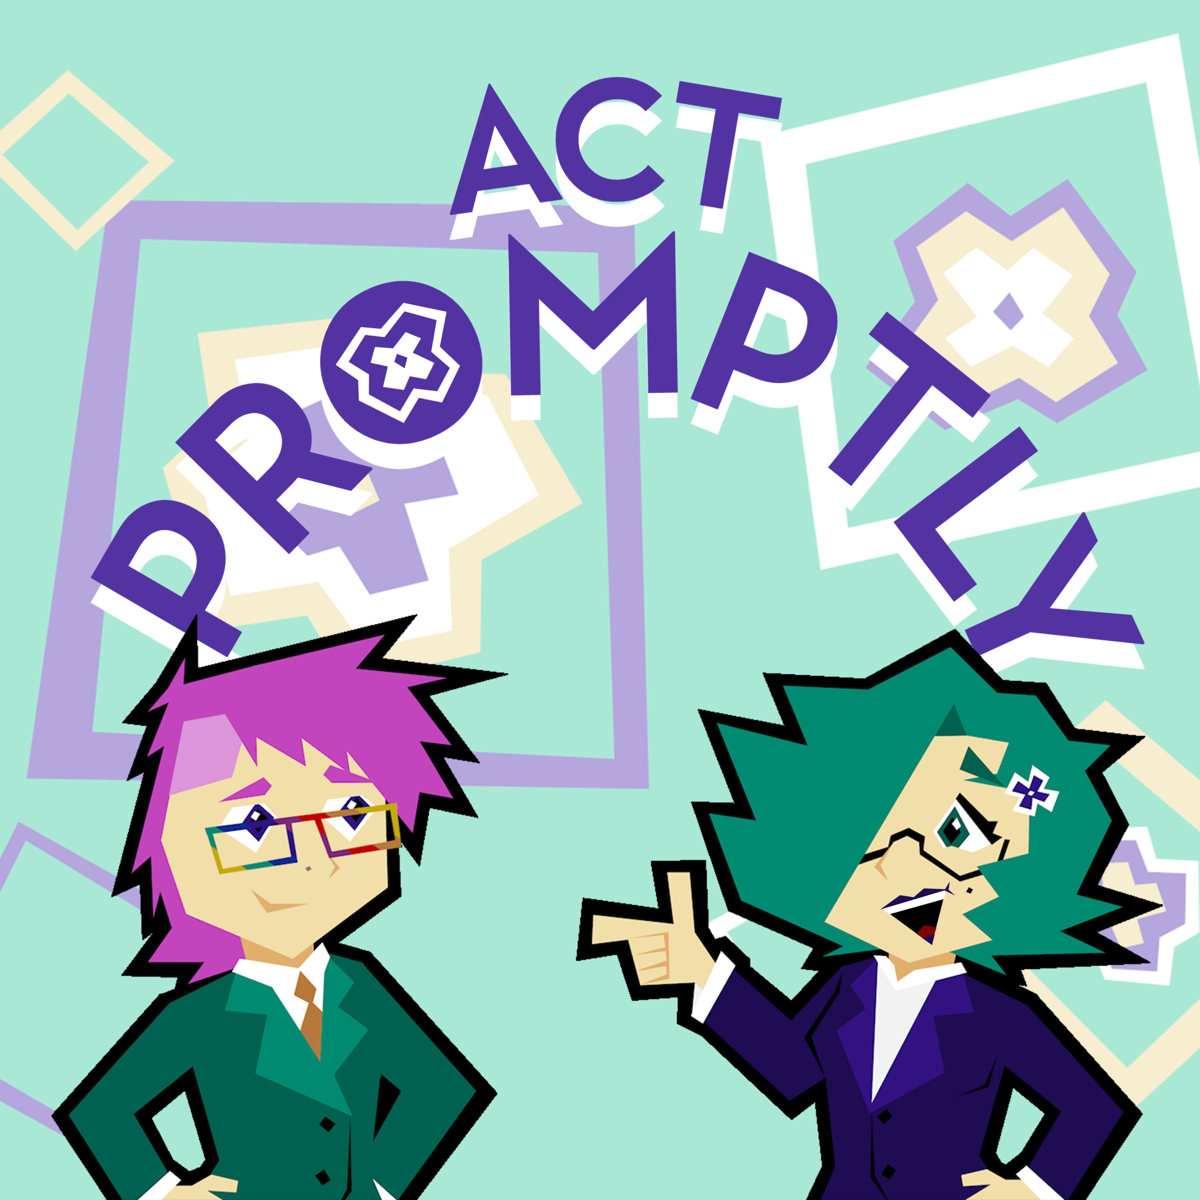 Act Promptly cover art. The two hosts, Ellie and Bee, stand side by side facing eachother. They are wearing suits and looking confident and fun. The Act Promptly logo rests above them.